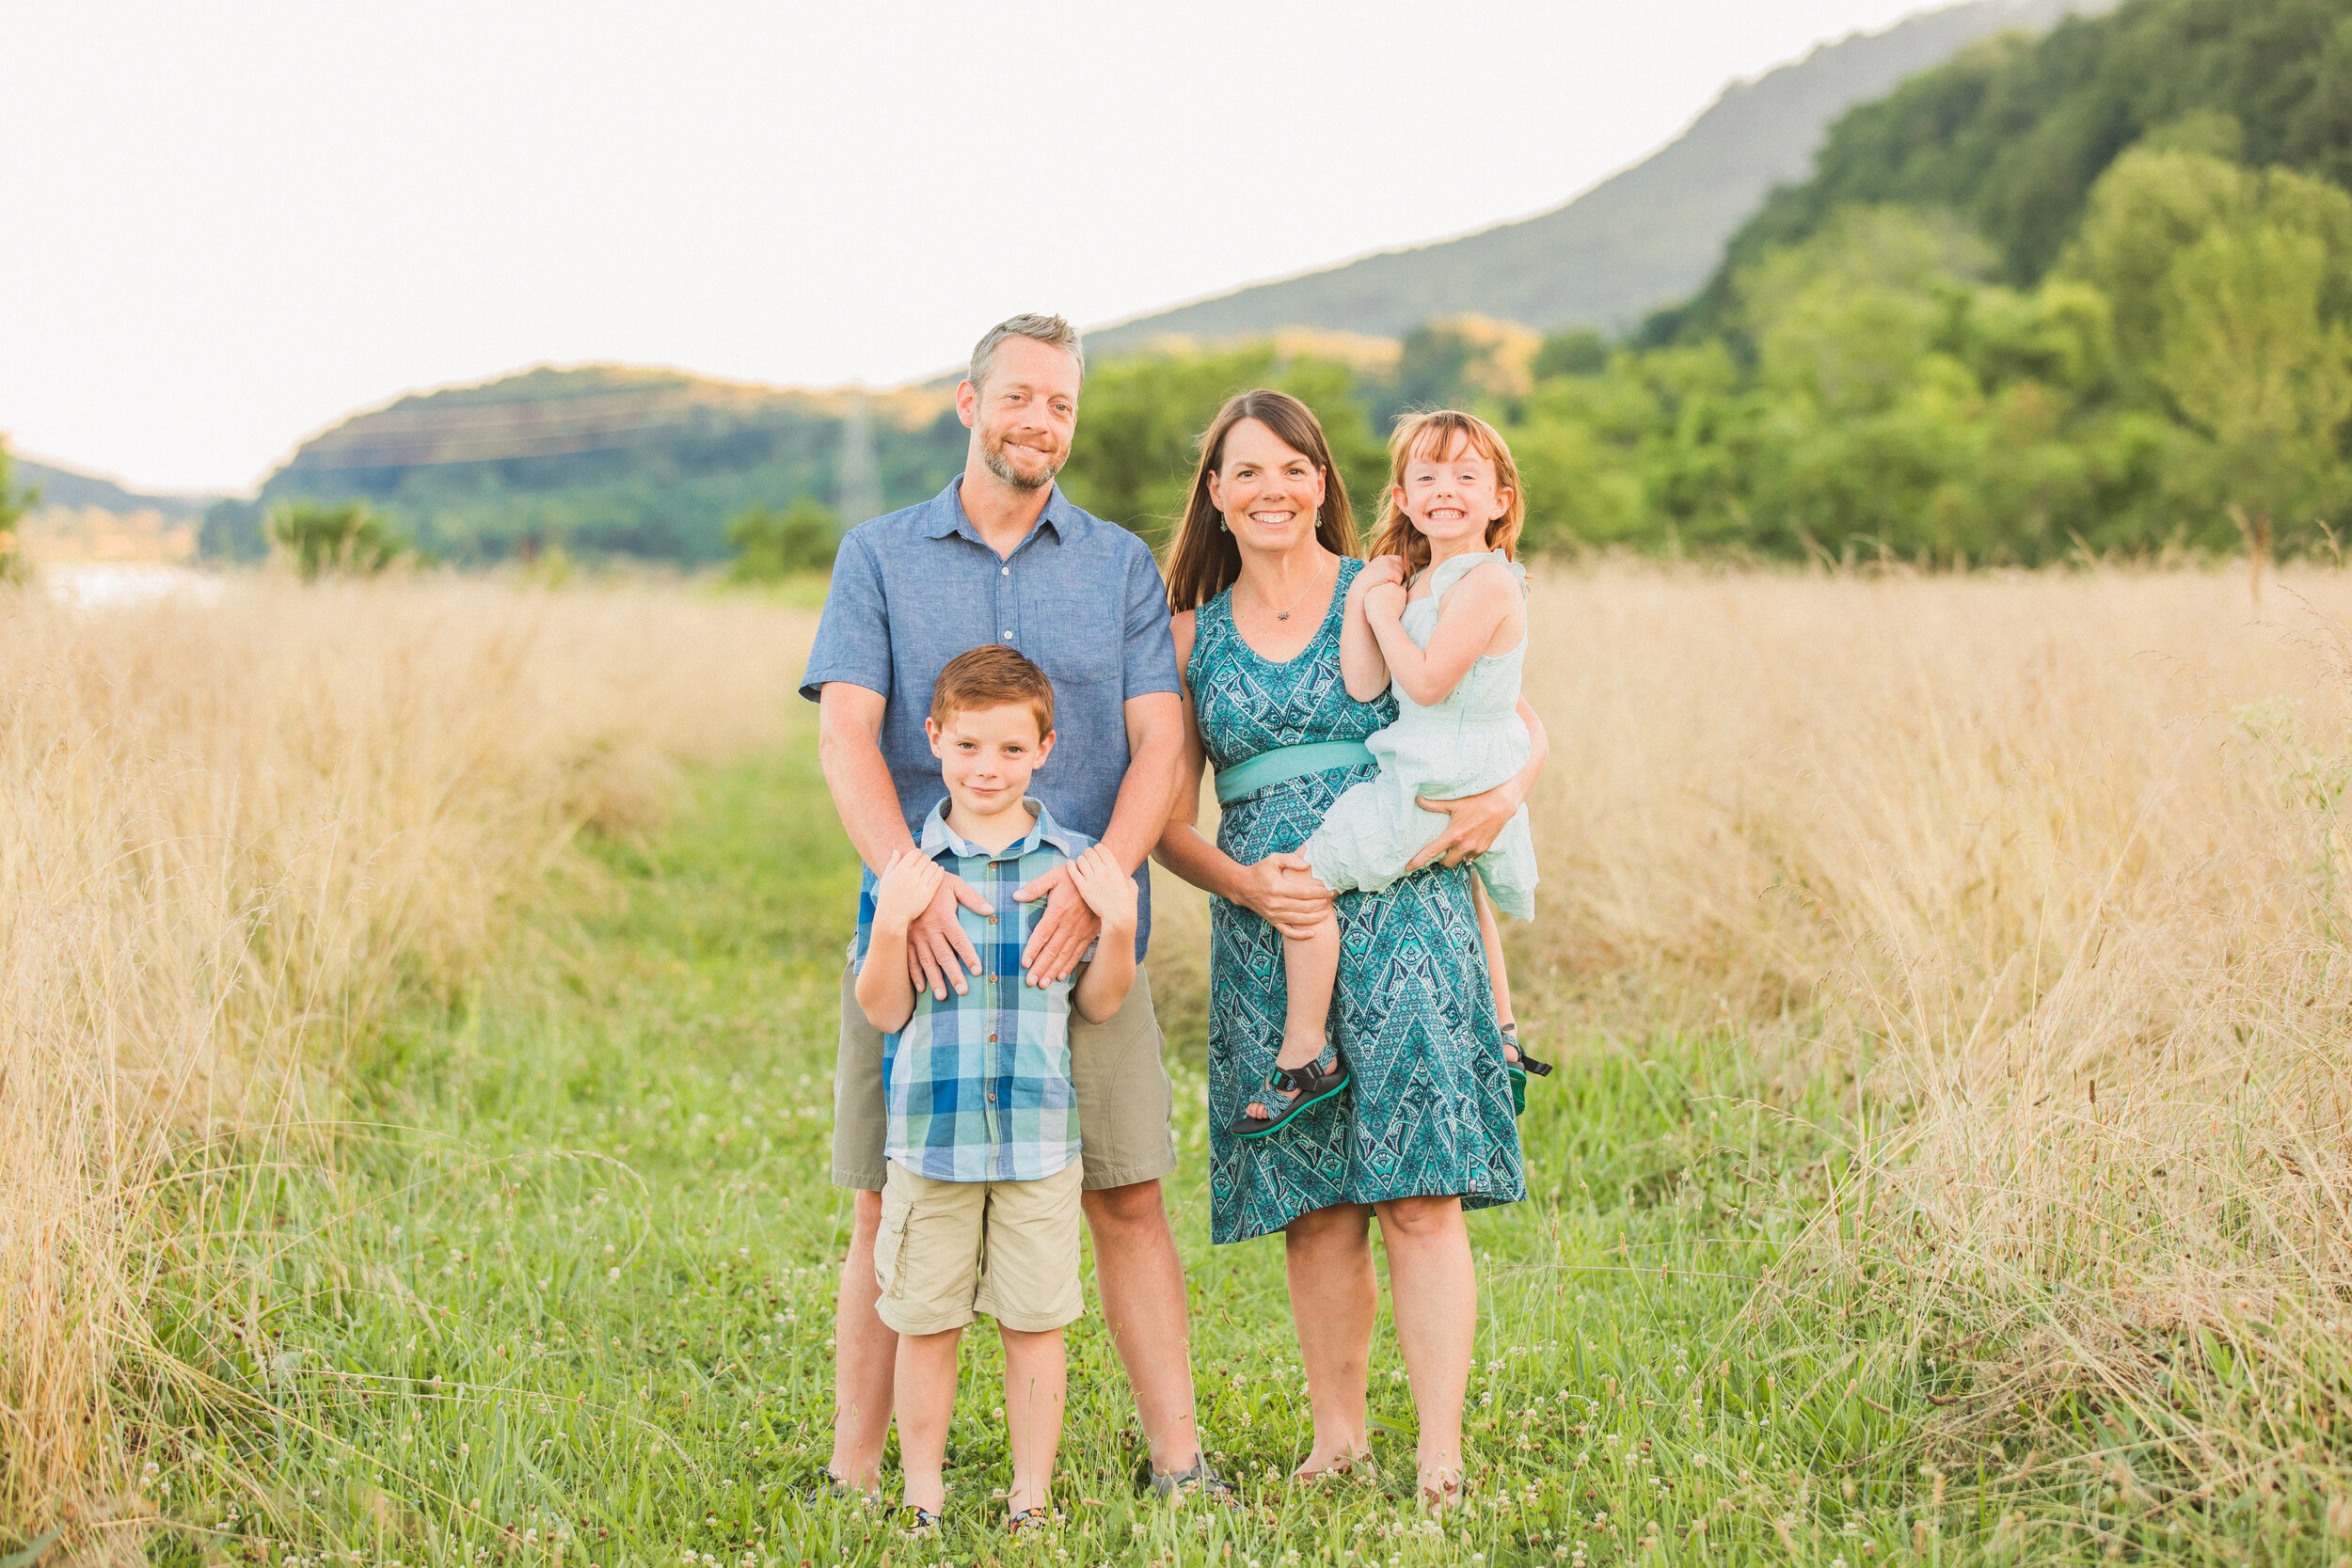 Family_Session_Chattanooga_TN_Emily_Lester_Photography-253.jpg